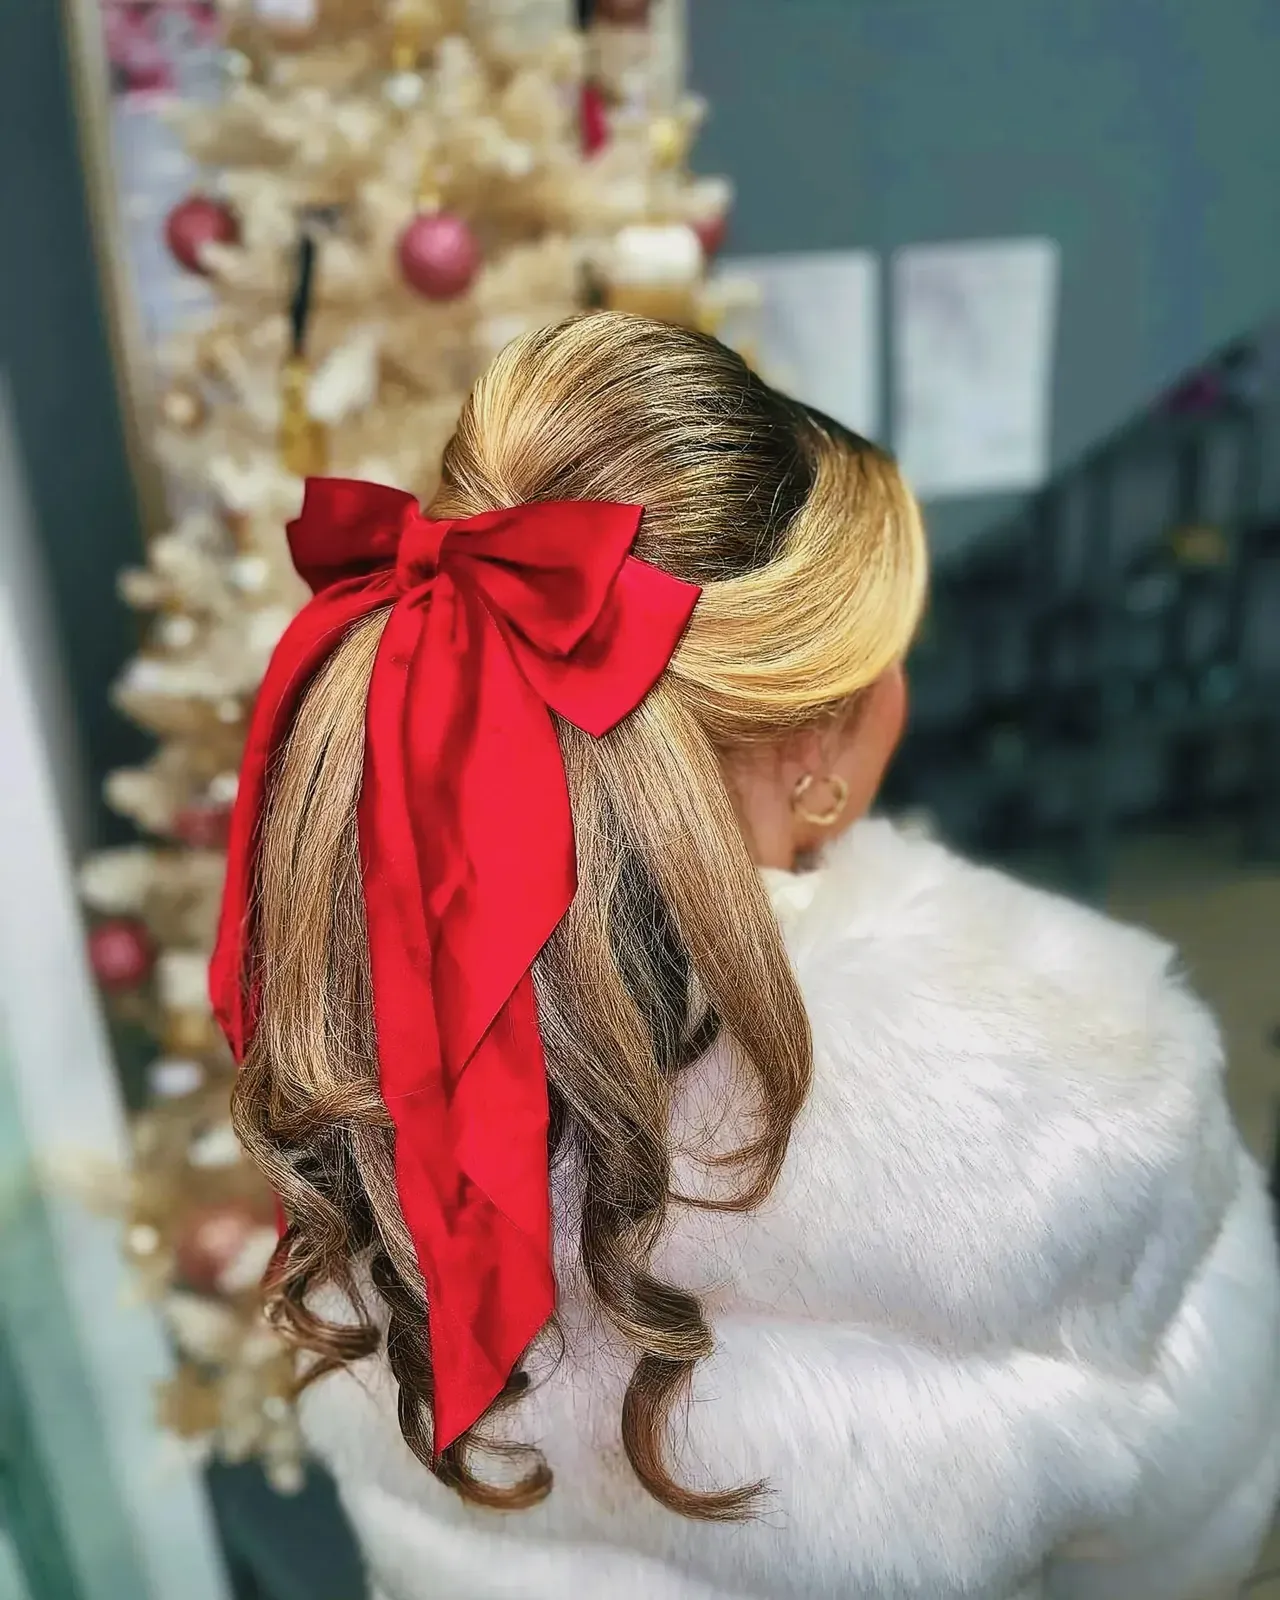 Stylish woman with a vibrant red bow in her hair